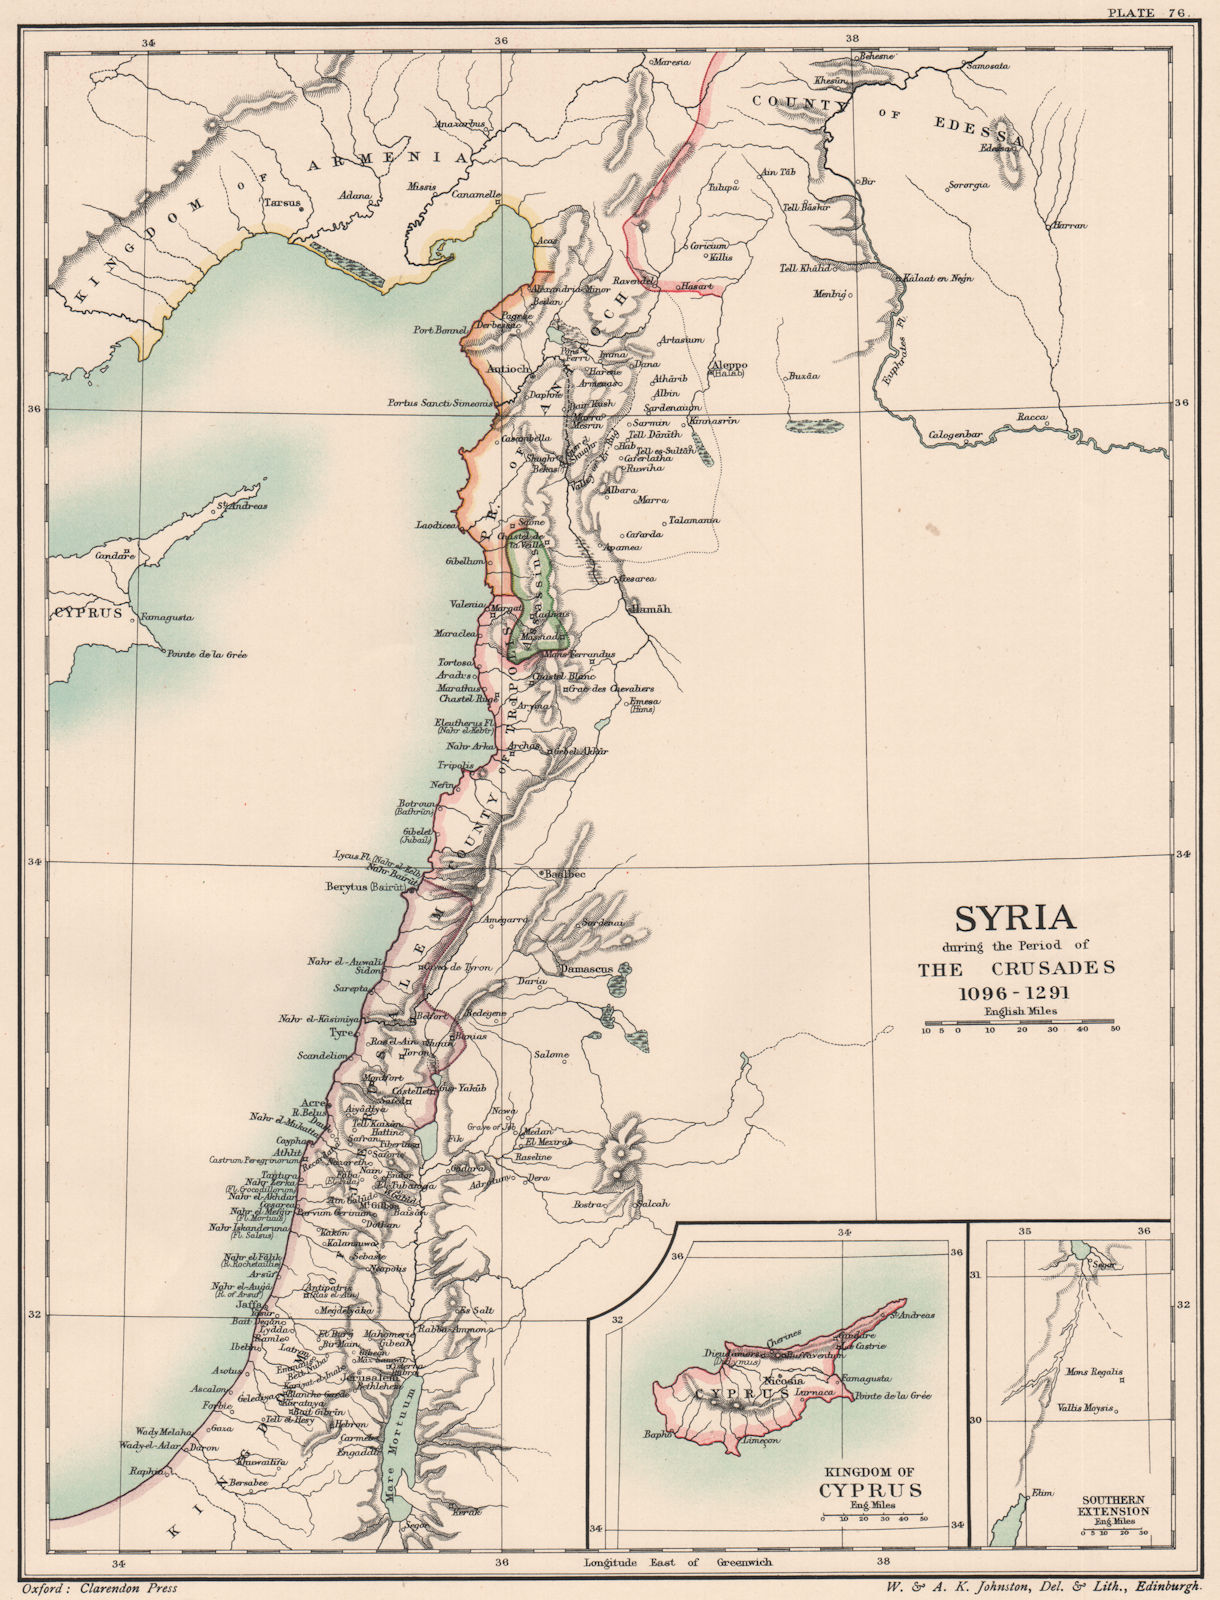 Associate Product SYRIA 1096-1291. during the Crusades. 12C 13C. Inset. Kingdom of Cyprus 1902 map